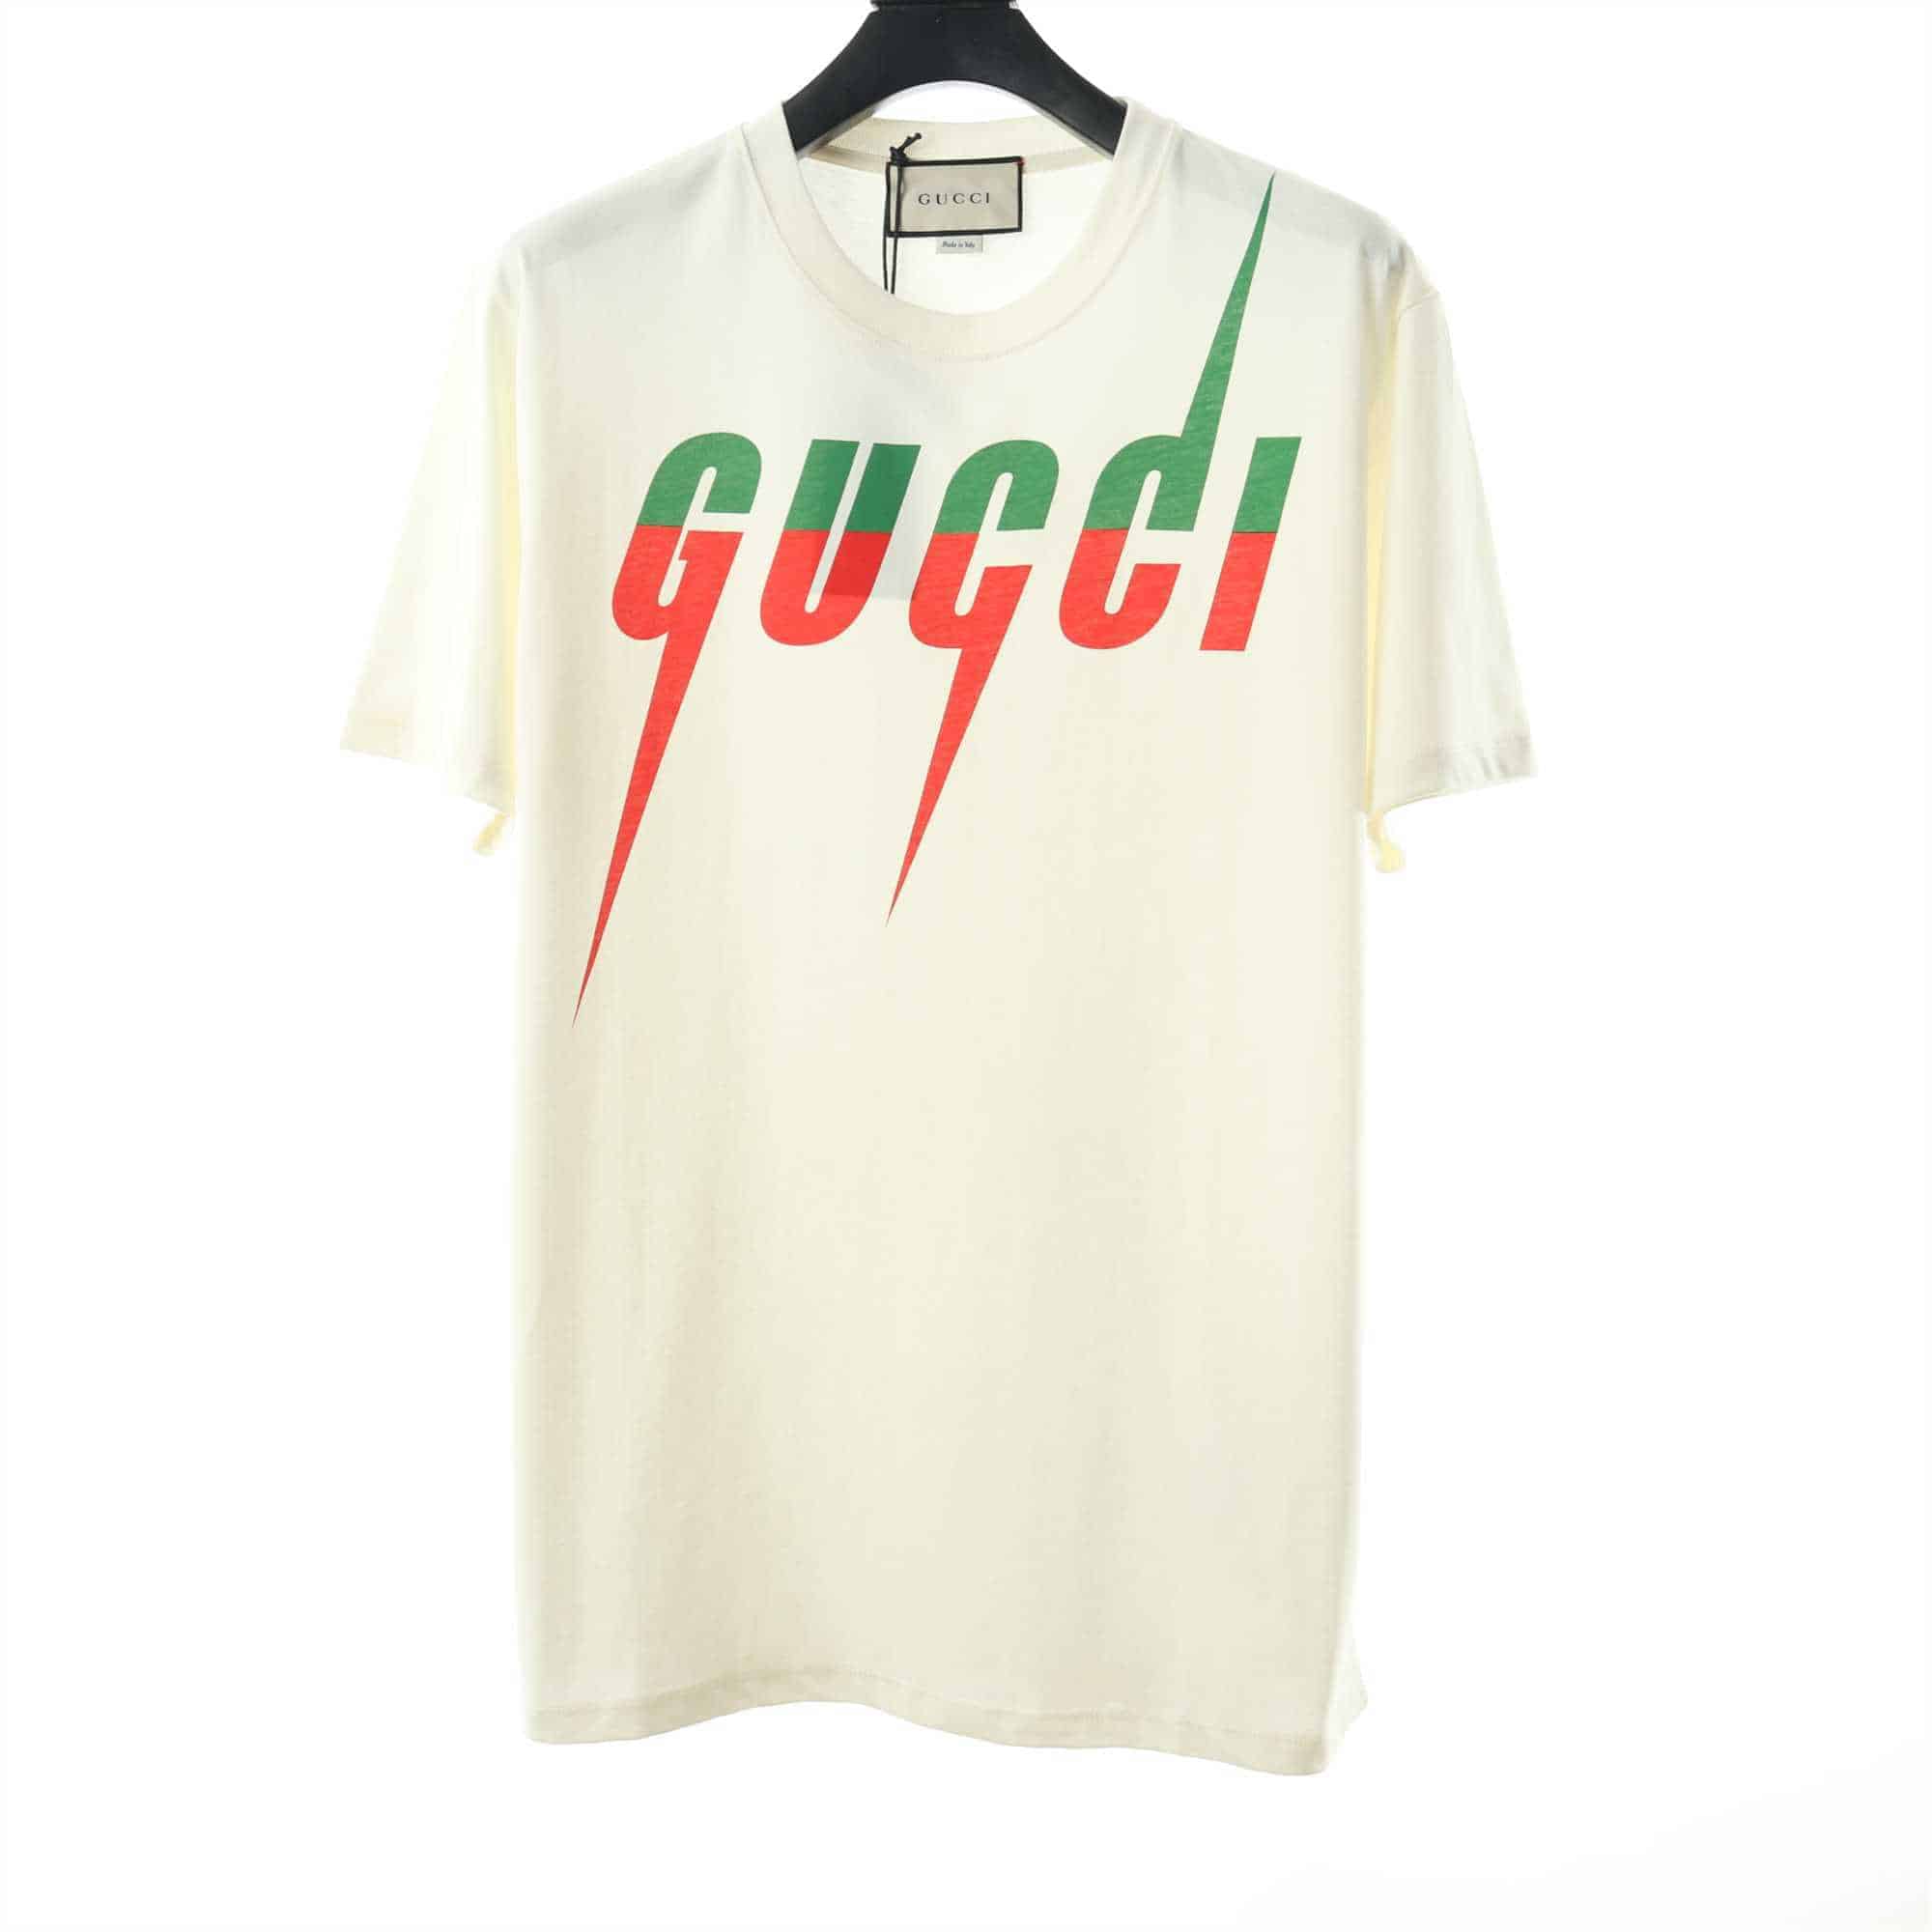 Warship steak darkness T-Shirt With Gucci Blade Print - GCS010 - We Replica!